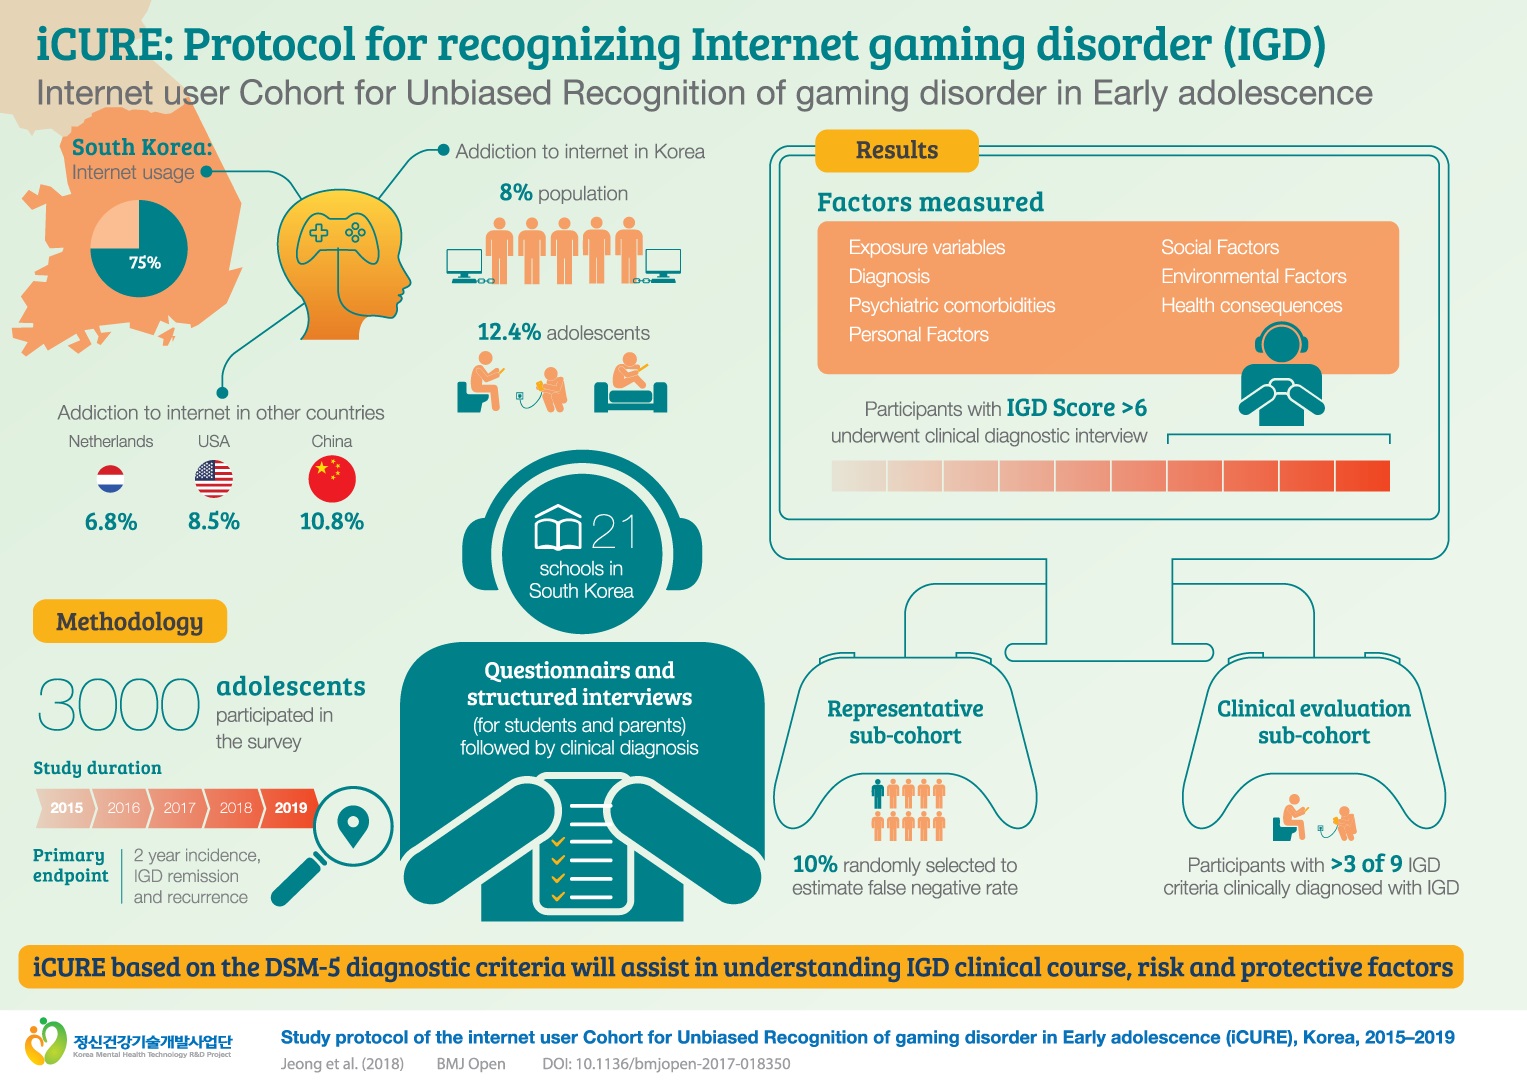 3. iCURE: Protocal for recognizing Internet gaming disorder(IGD)